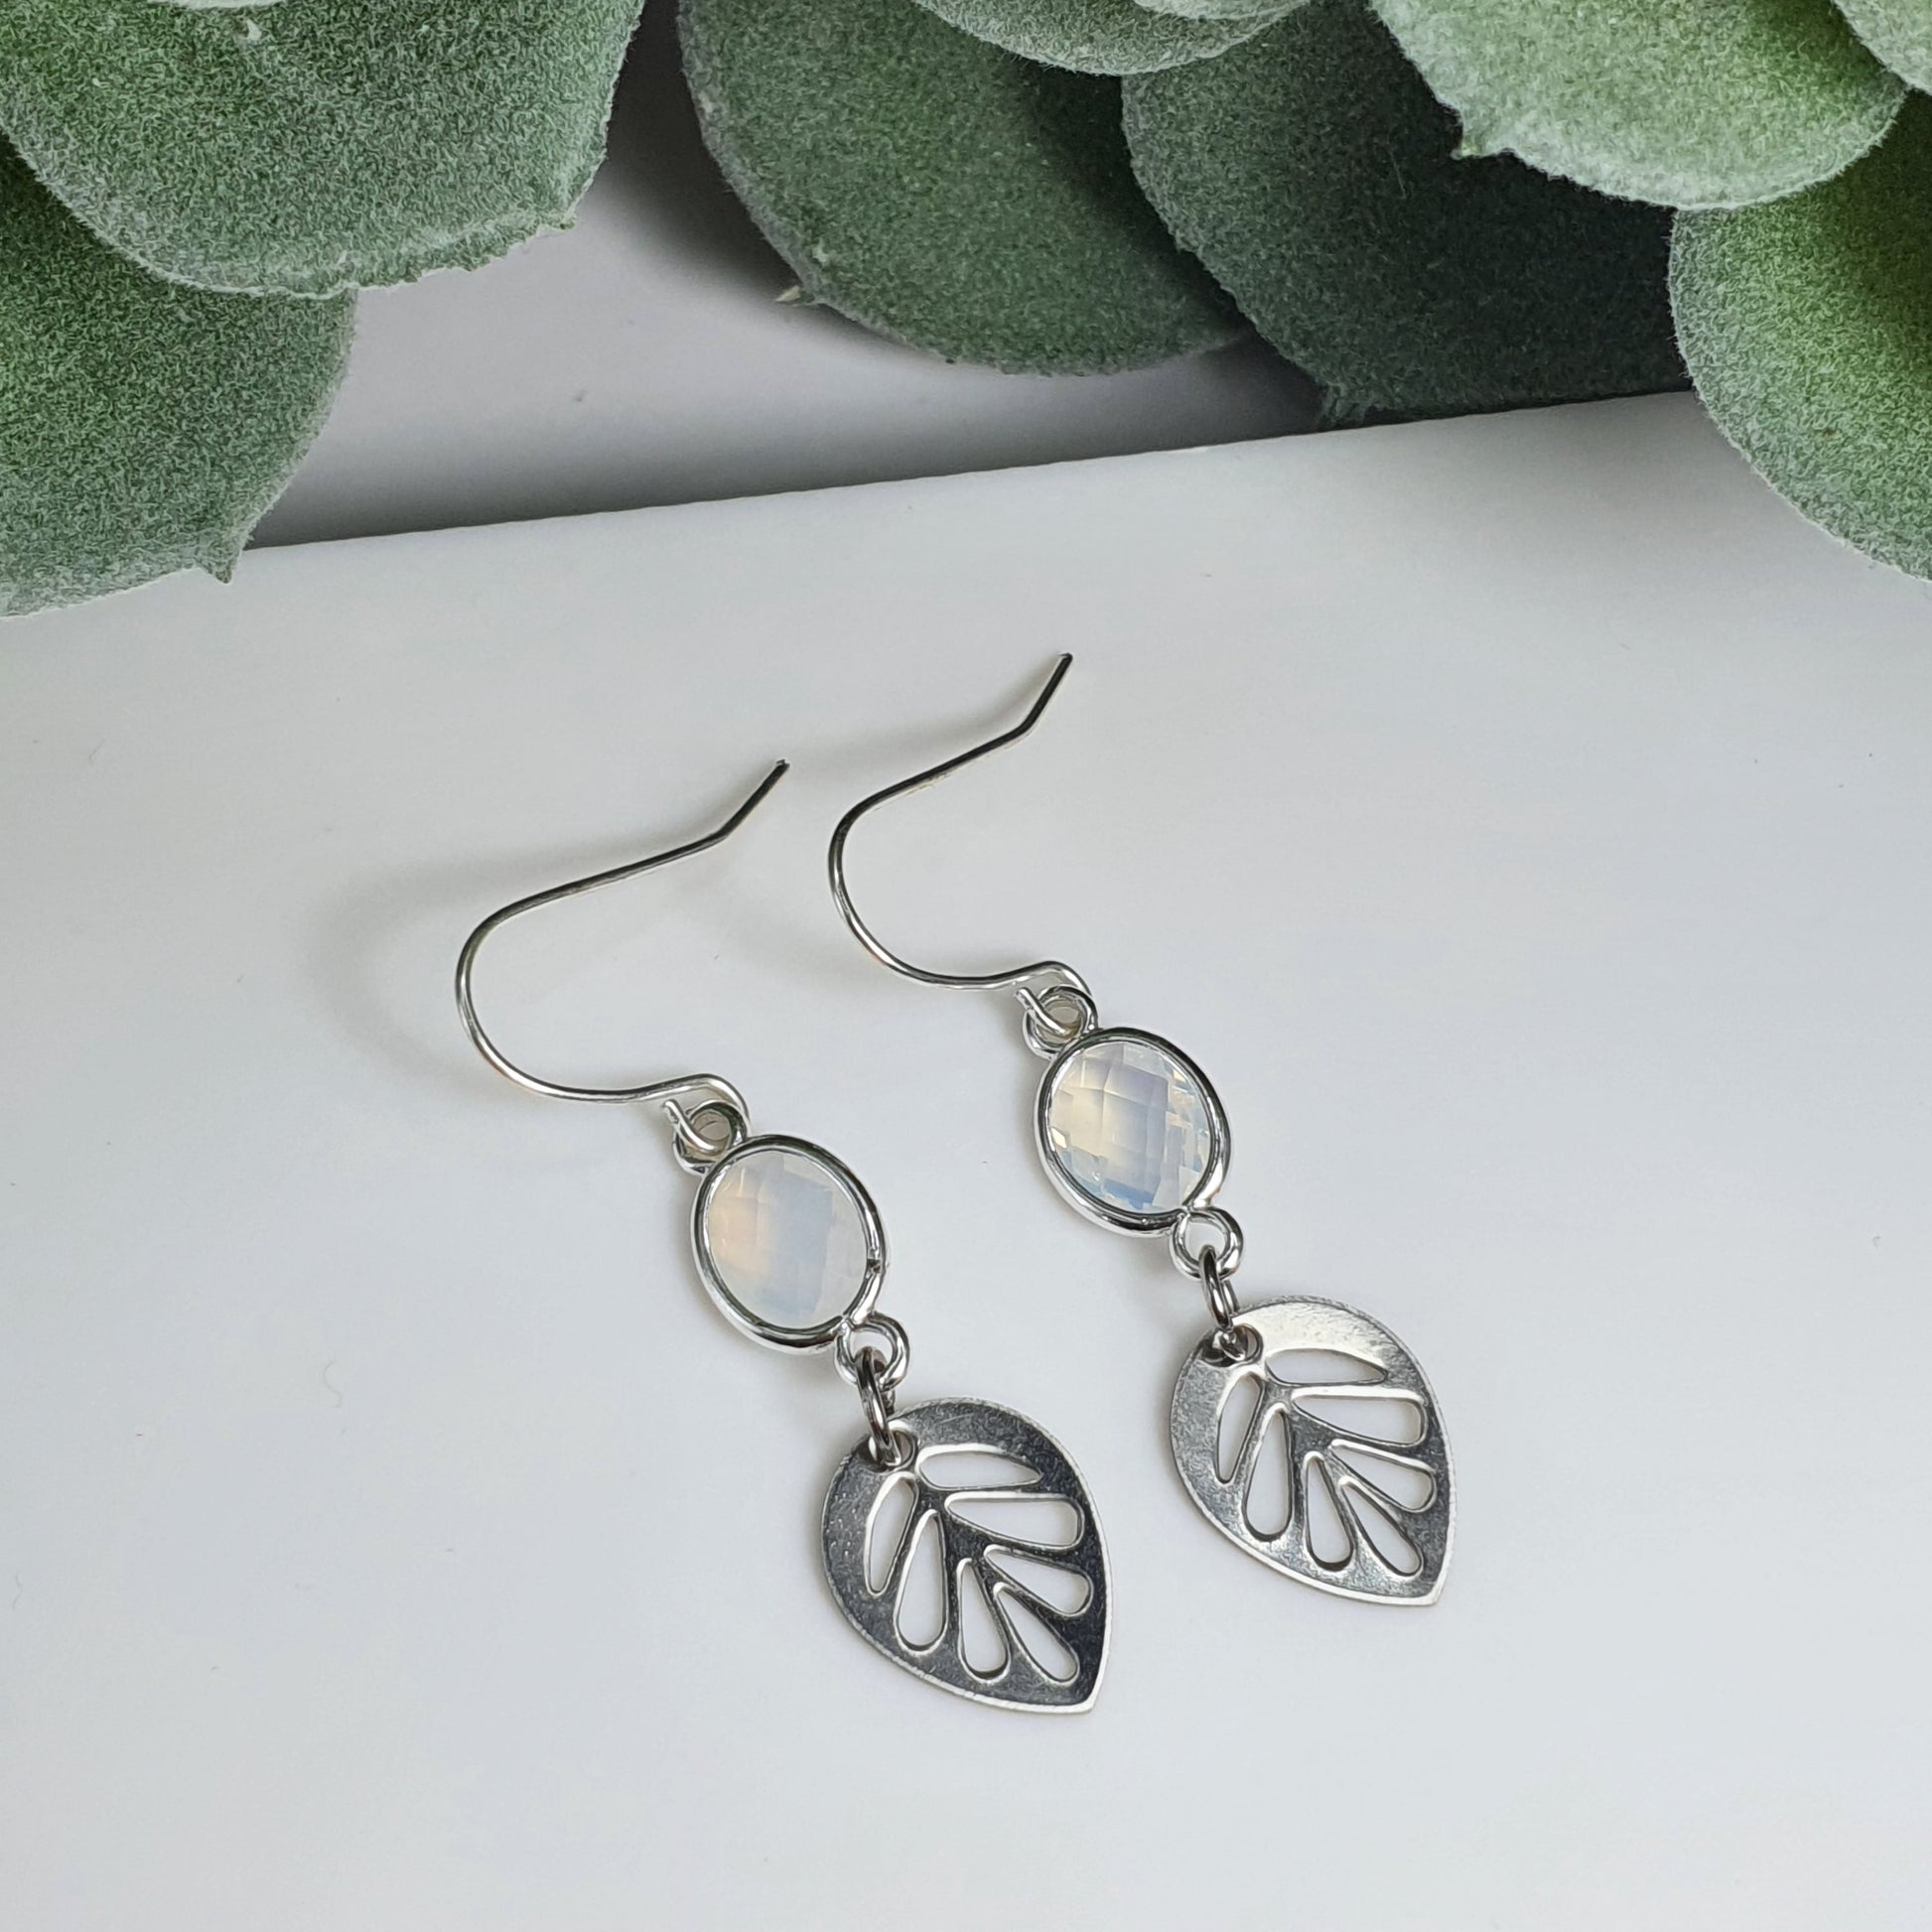 Colourful glass silver leaf earrings | Fashion earrings | Birthday Gifts, Anniversary Gifts, Valentine's Day, Christmas, Easter, Eid, Mother's Day, Diwali, Hannukah, Women's, Girl's, Gifts for her, Gifts for Girlfriend, Gifts for Mom, Gifts for Mum, Gifts for Friend, Handmade Gifts, Handmade Jewelry, New Year's Eve, Graduation, Boho, Hippie, Minimalist, Gemstone, Crystal, Crystal Healing